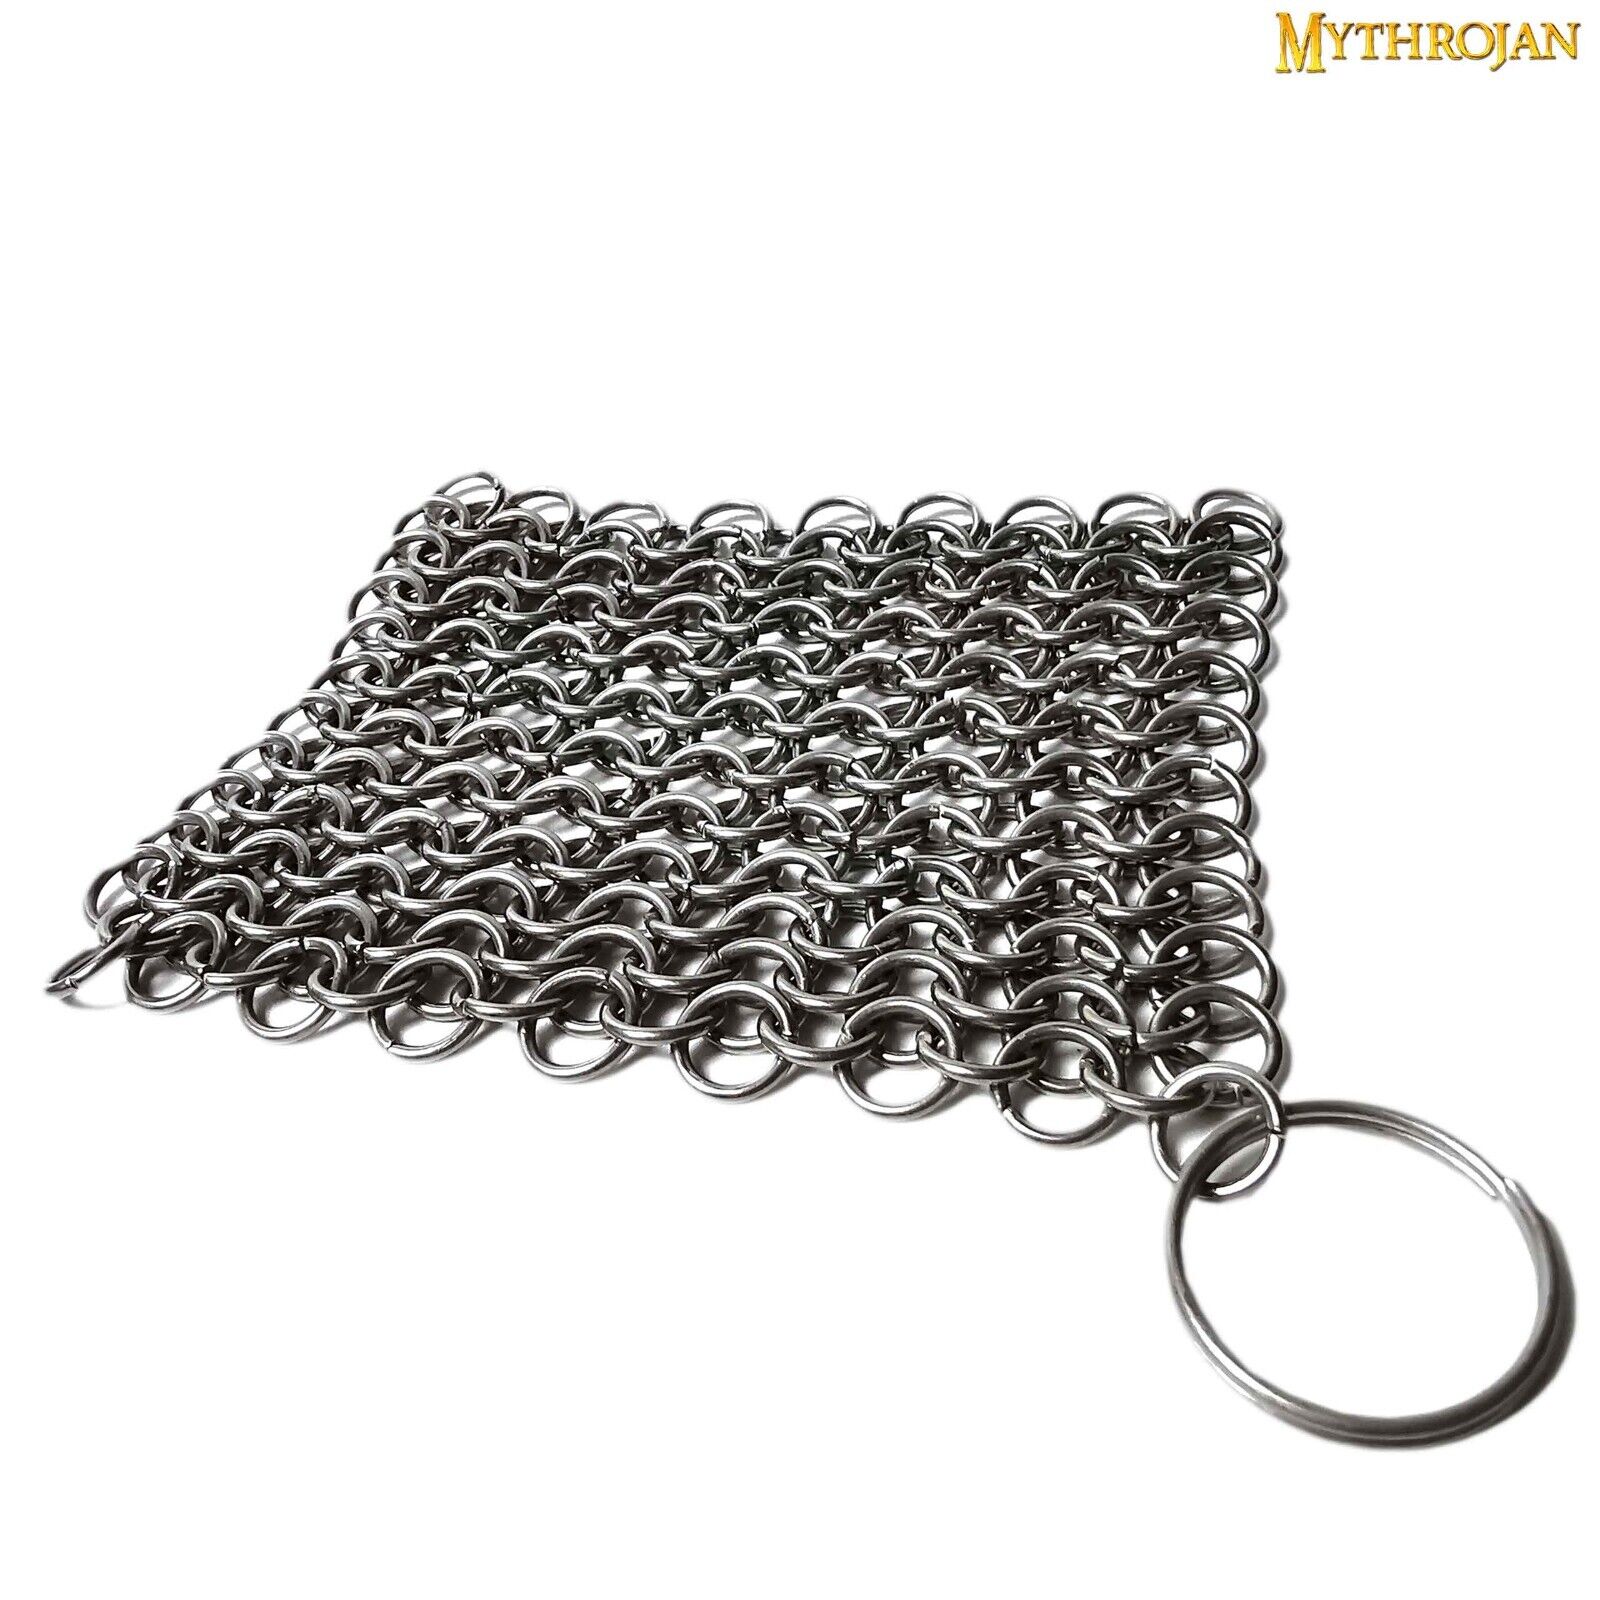 Chainmail Steel Stainless Skillet Cast Iron Scrubber Kitchen Cookware 10 x 10cm